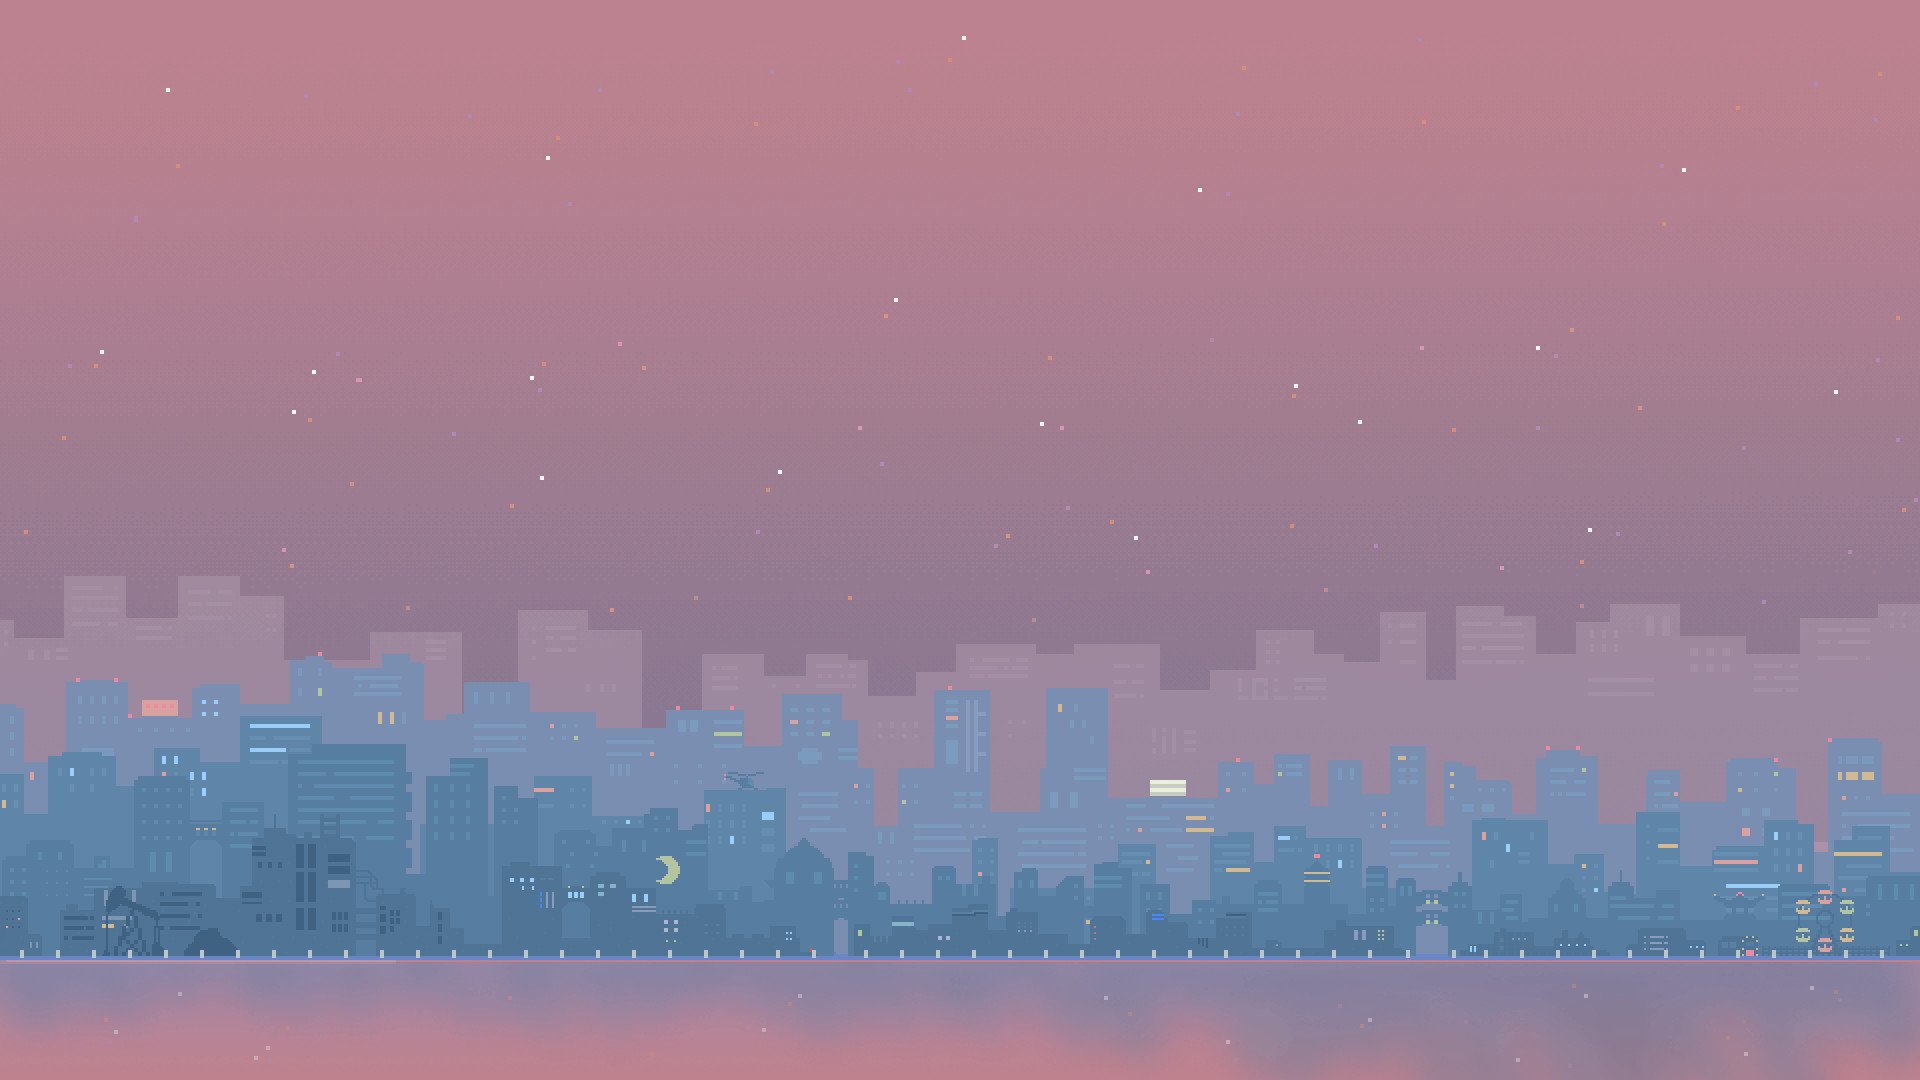 A cityscape at night with a purple and pink sky - Art, pixel art